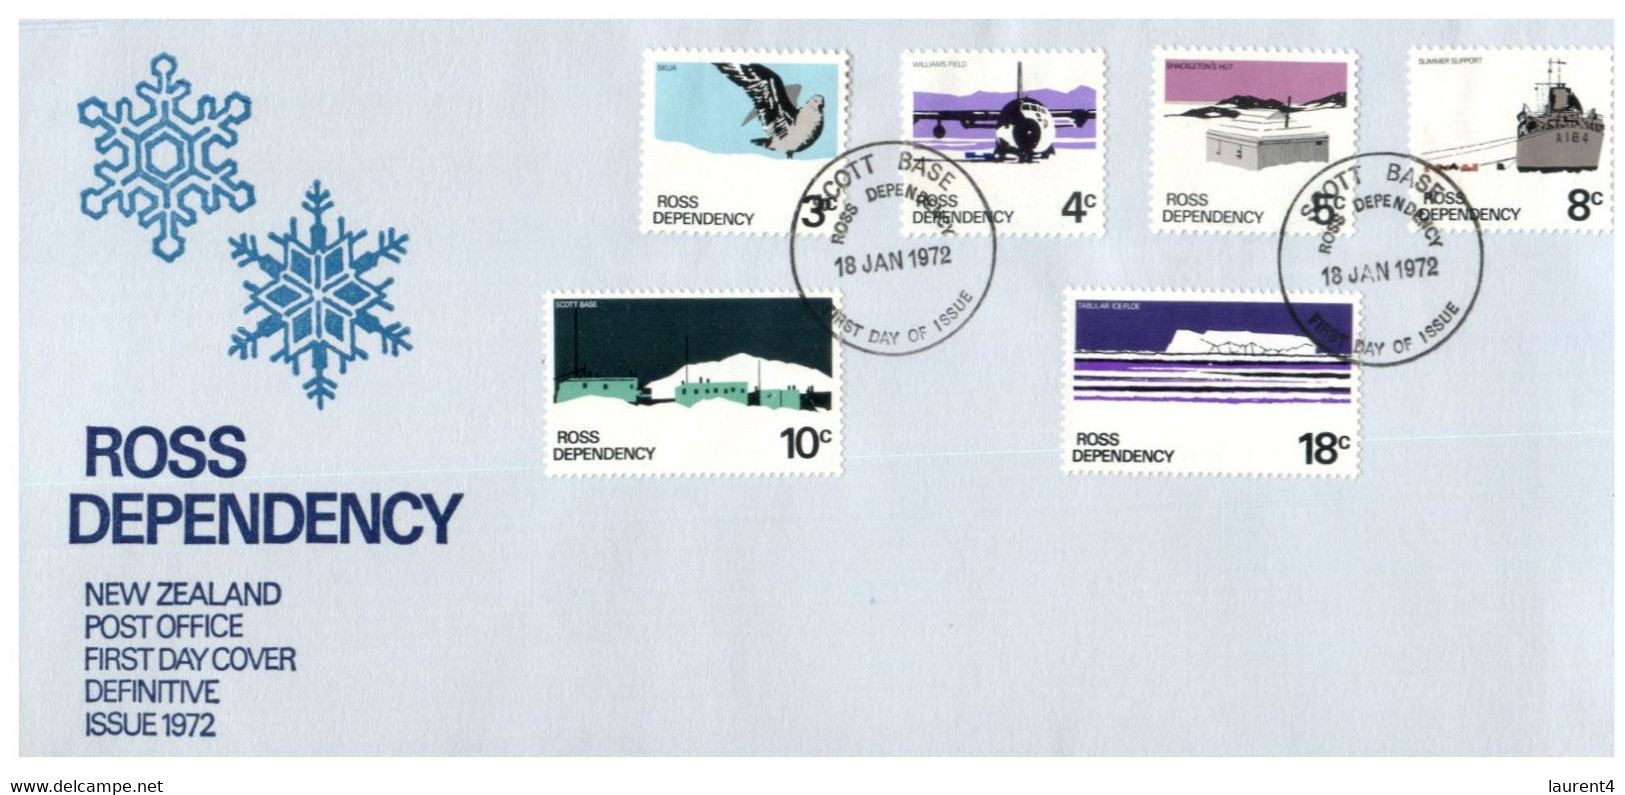 (QQ 10) Ross Dependency FDC - 1972 (New Zealand Antarctica) - FDC